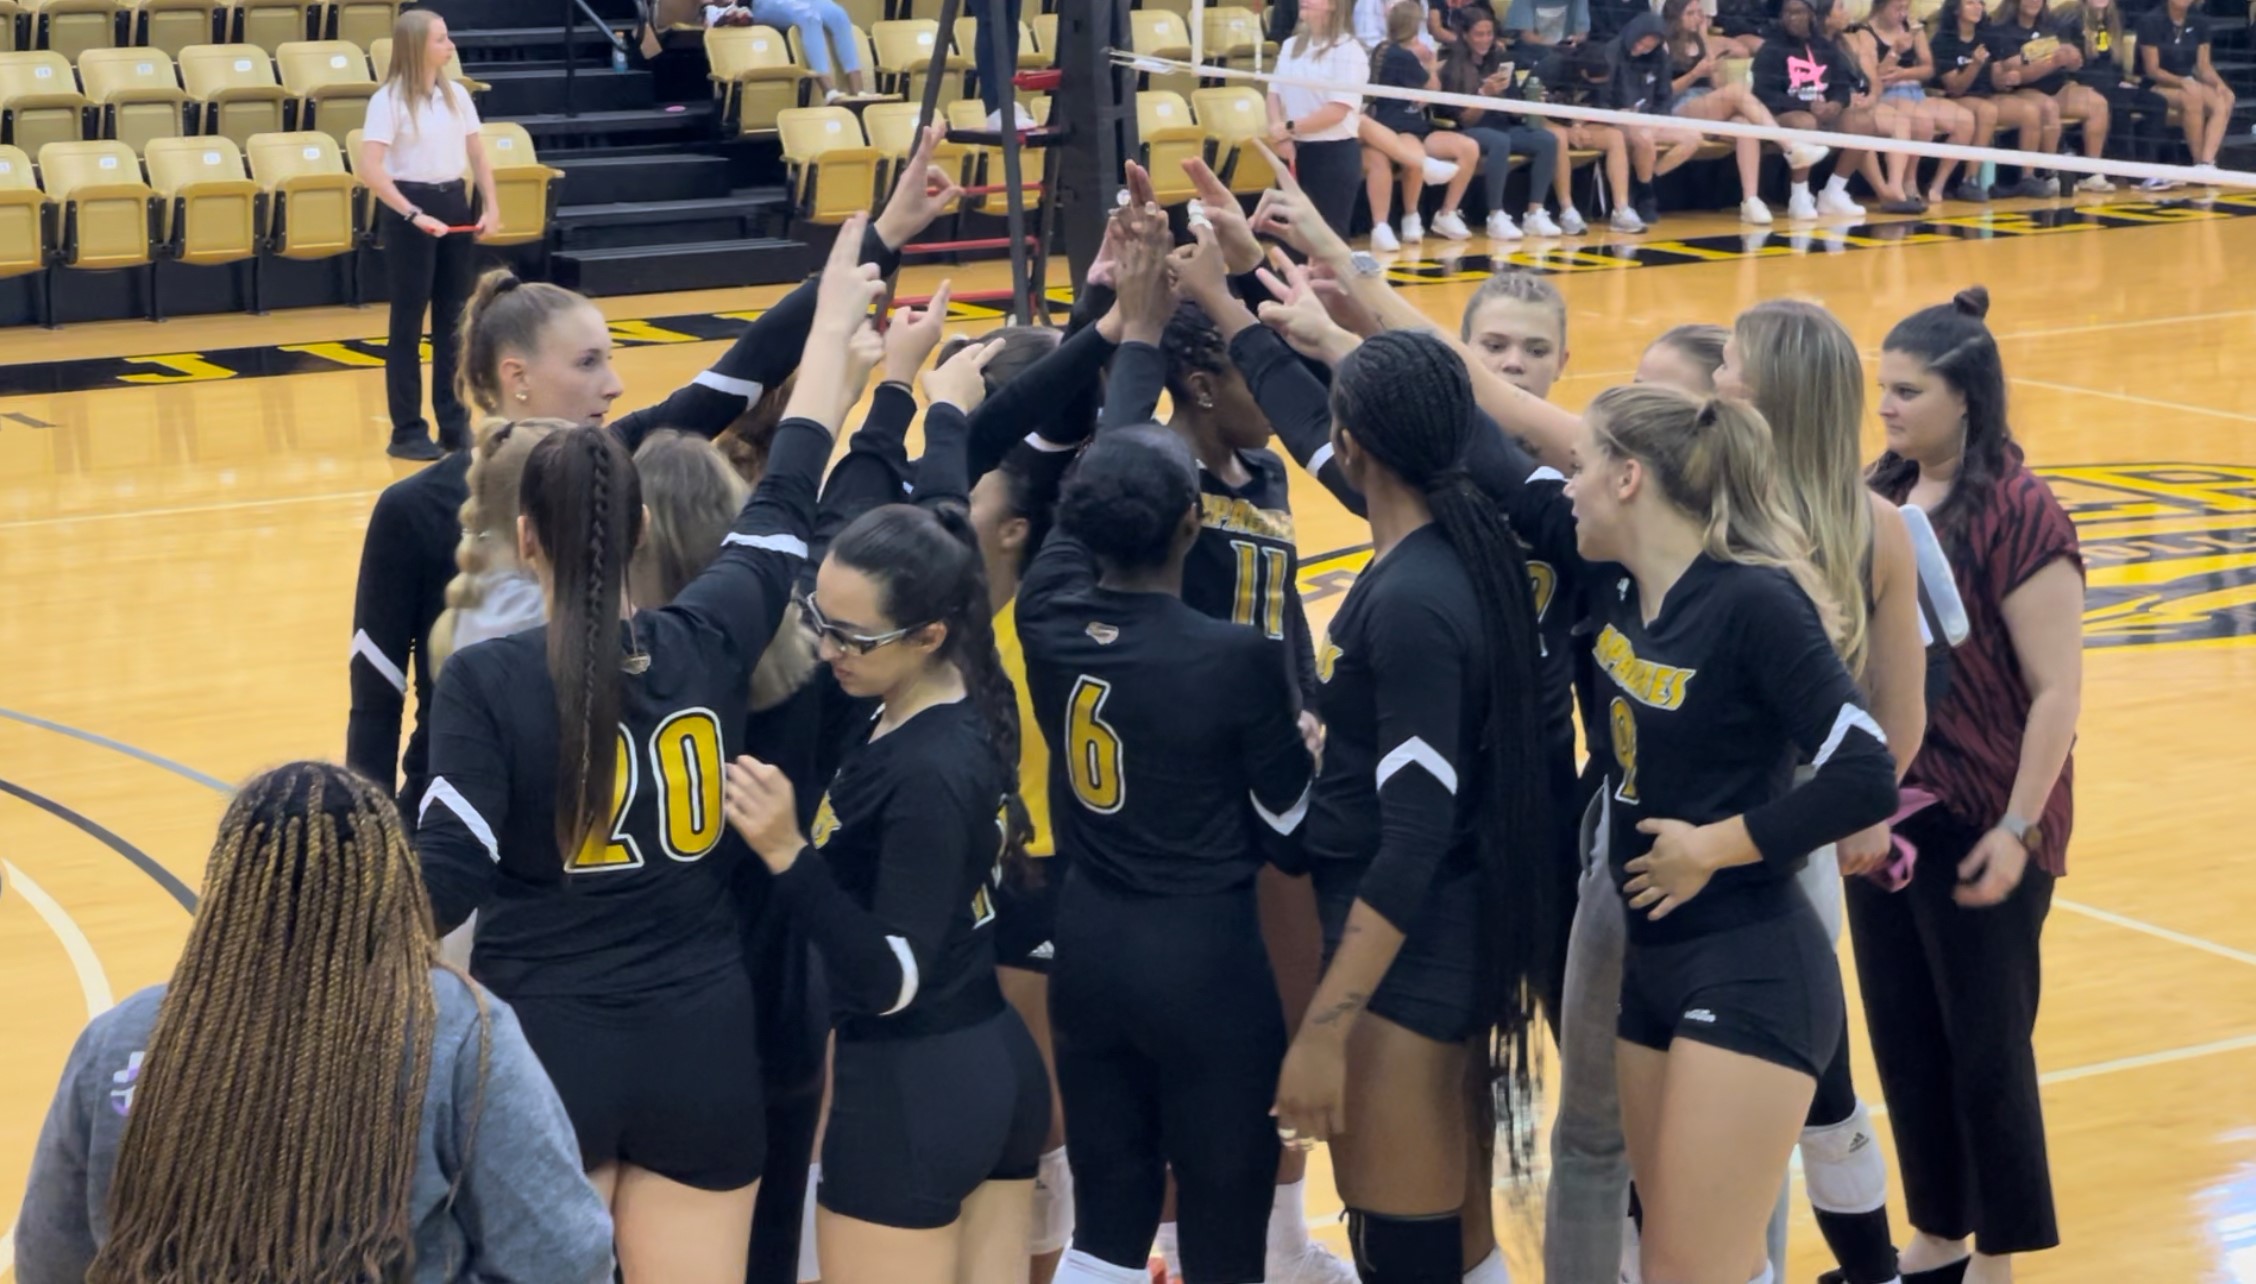 Apaches win 3rd match in a row with home sweep over Coastal Bend.